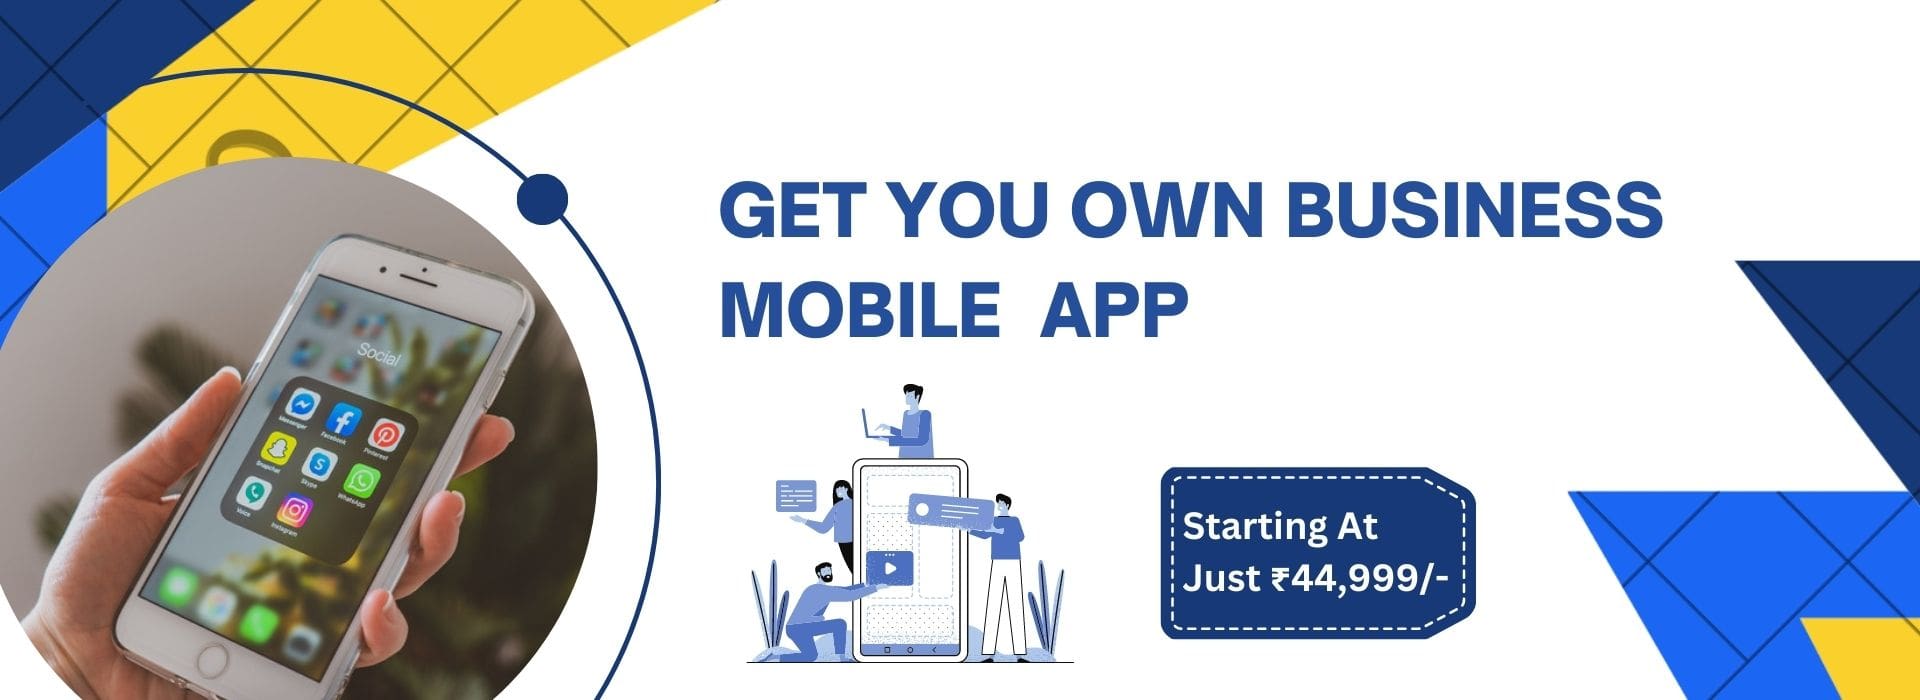 Get you own business mobile app